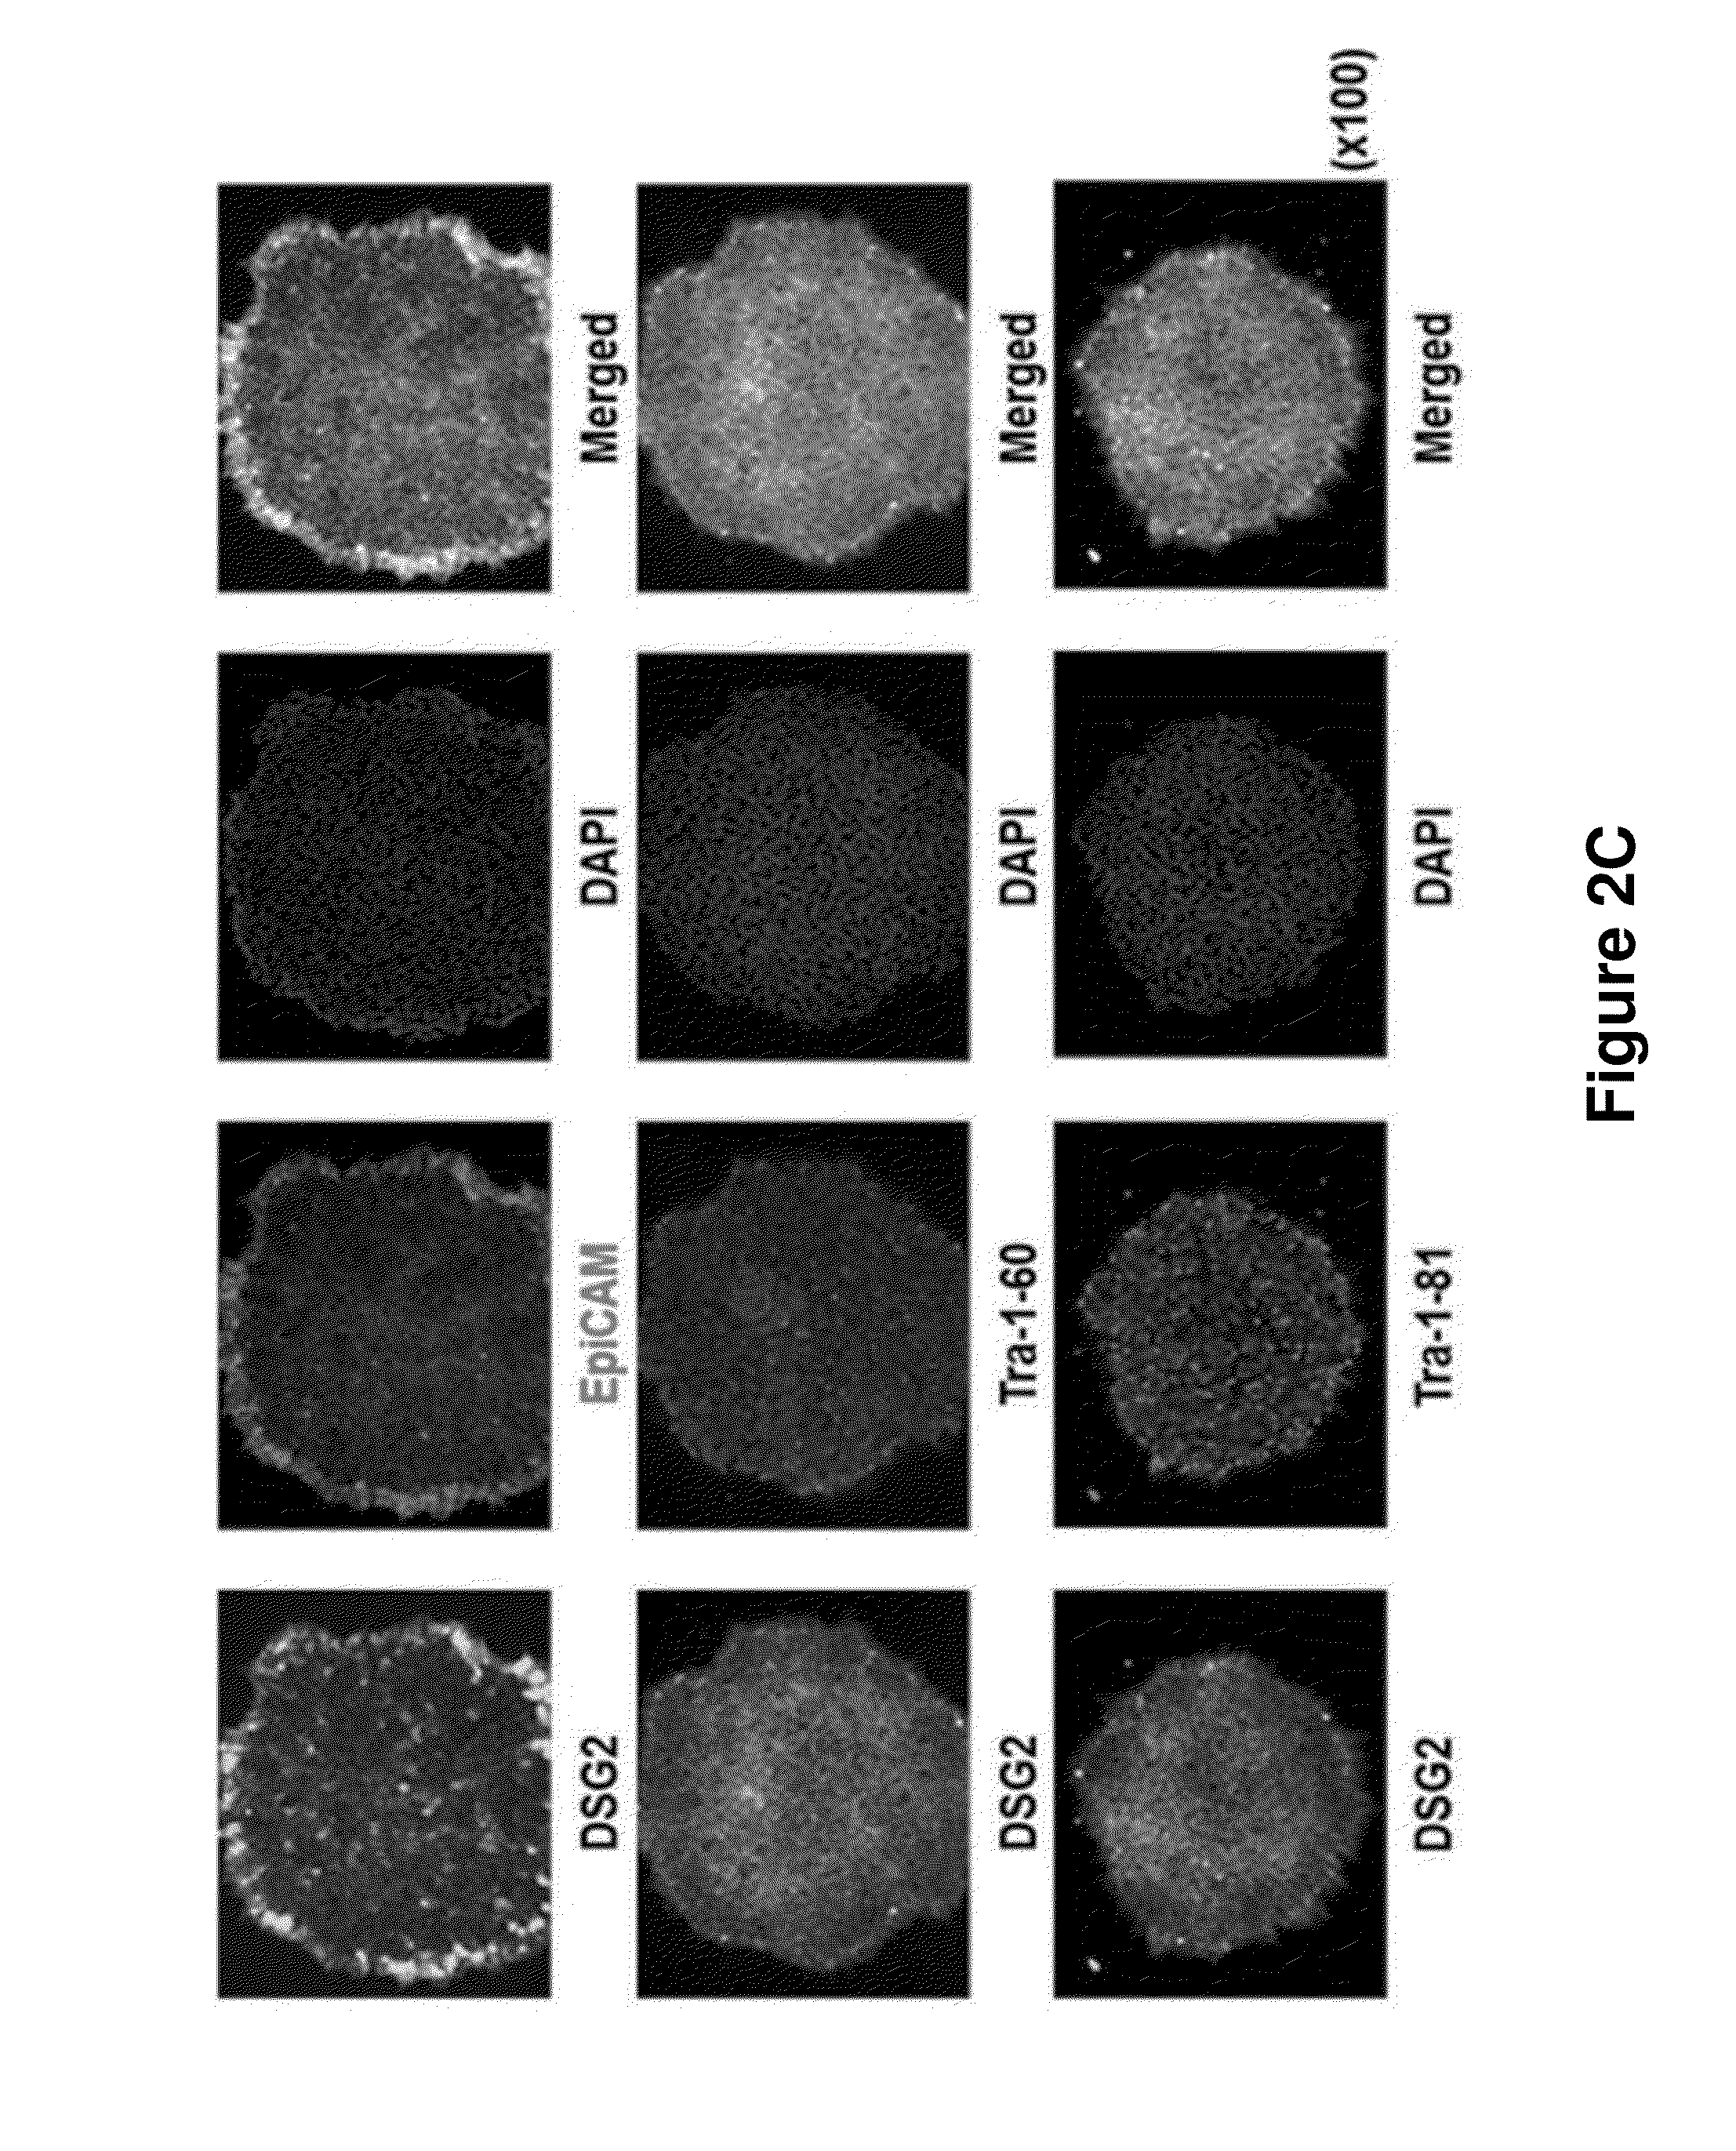 Composition for Detecting Undifferentiated Human Pluripotent Stem Cell, Monoclonal Antibody 6-1 and Use Thereof